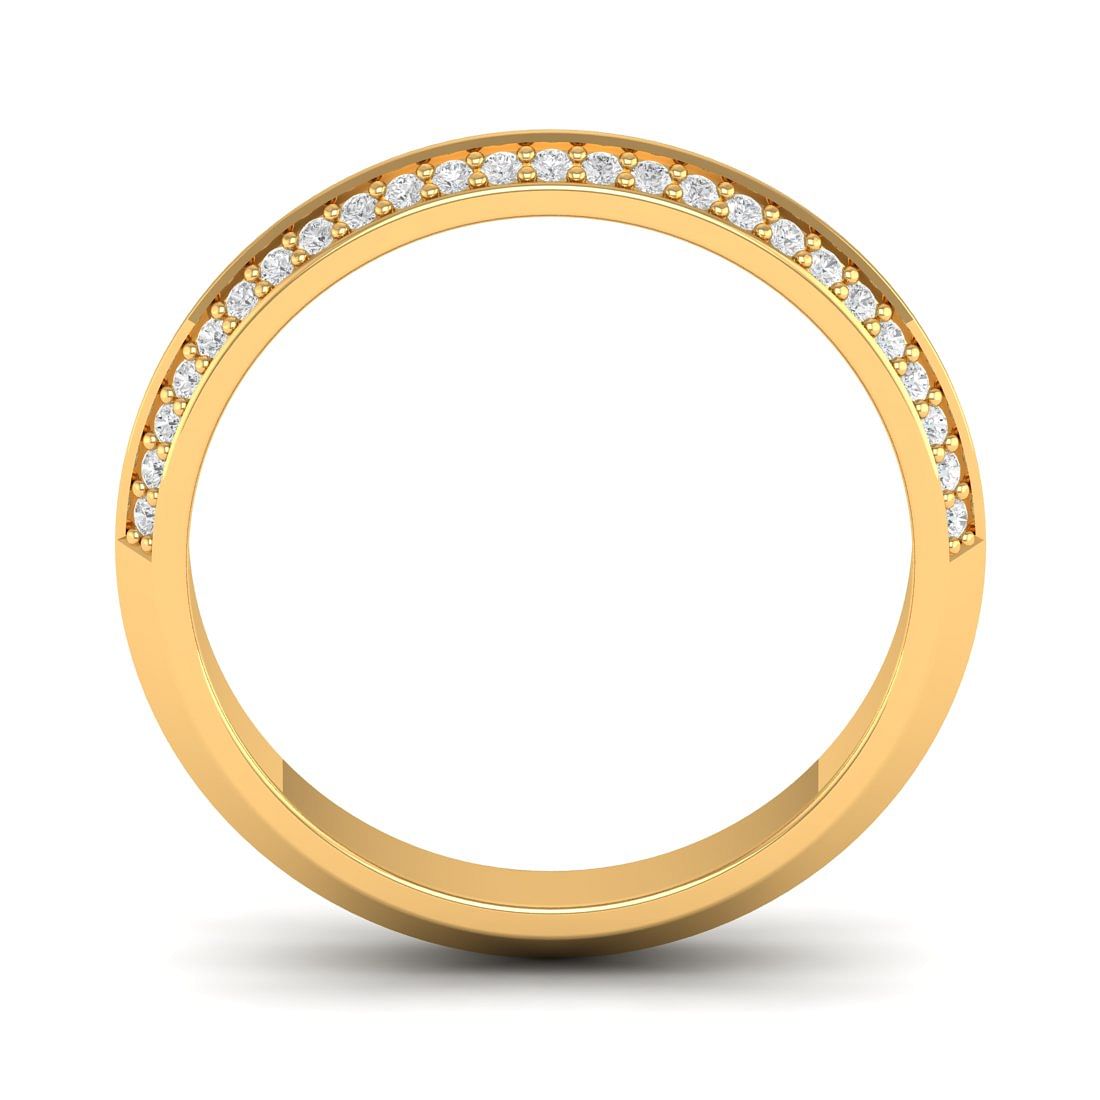 Chanchal band style yellow gold diamond ring for women